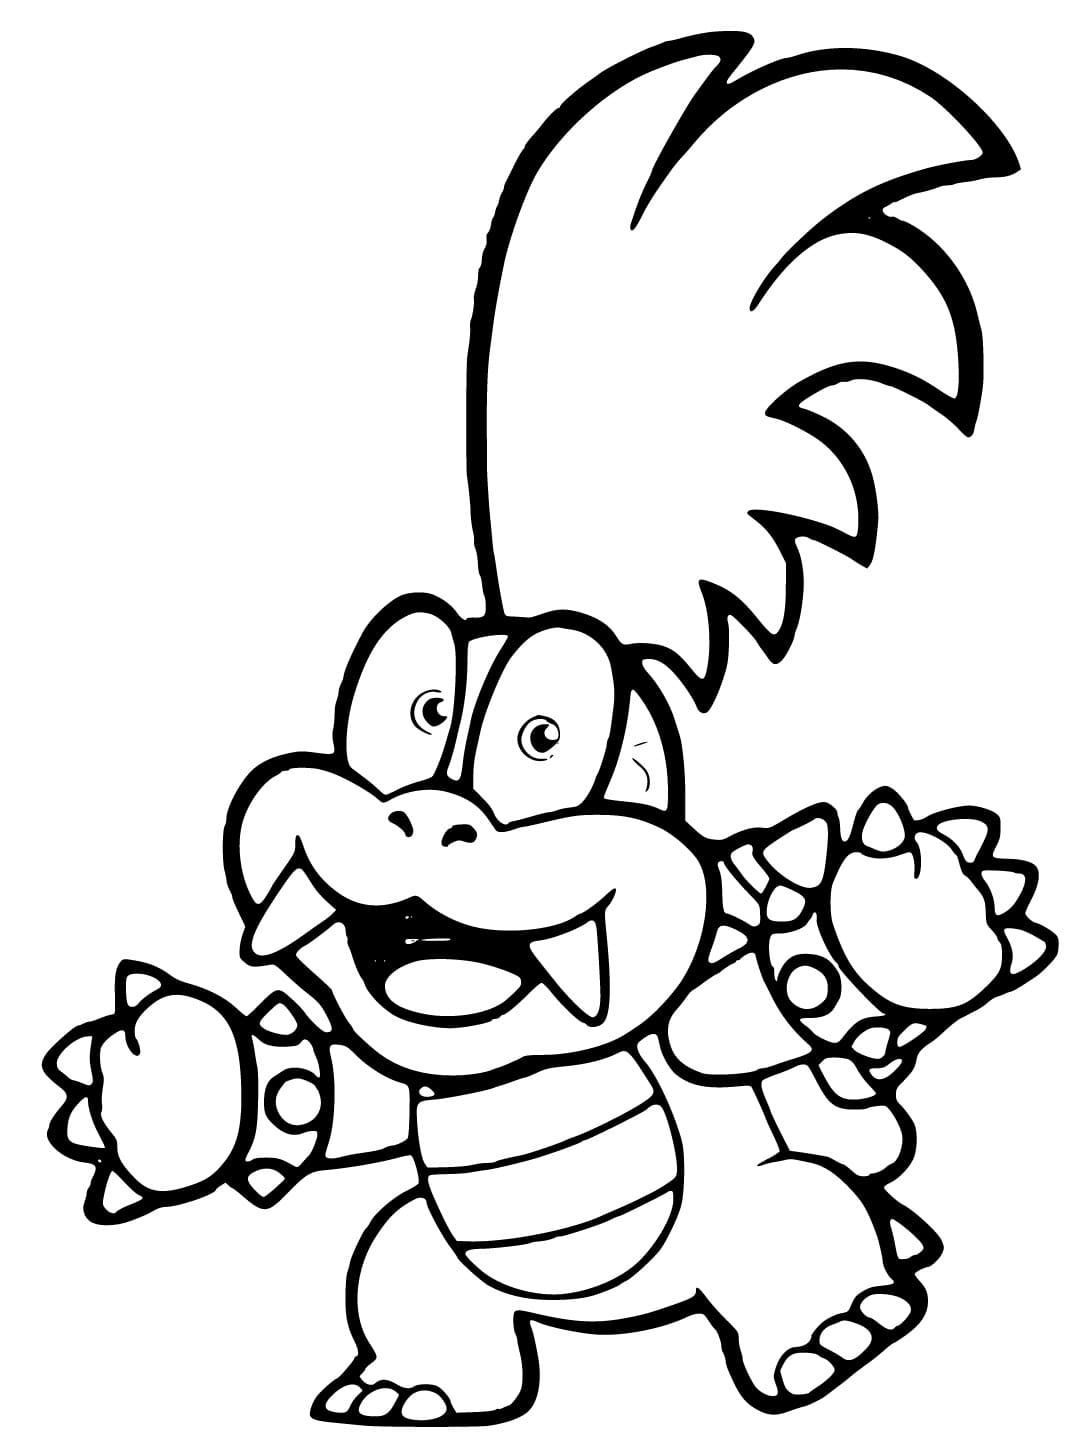 Friendly larry koopa coloring page